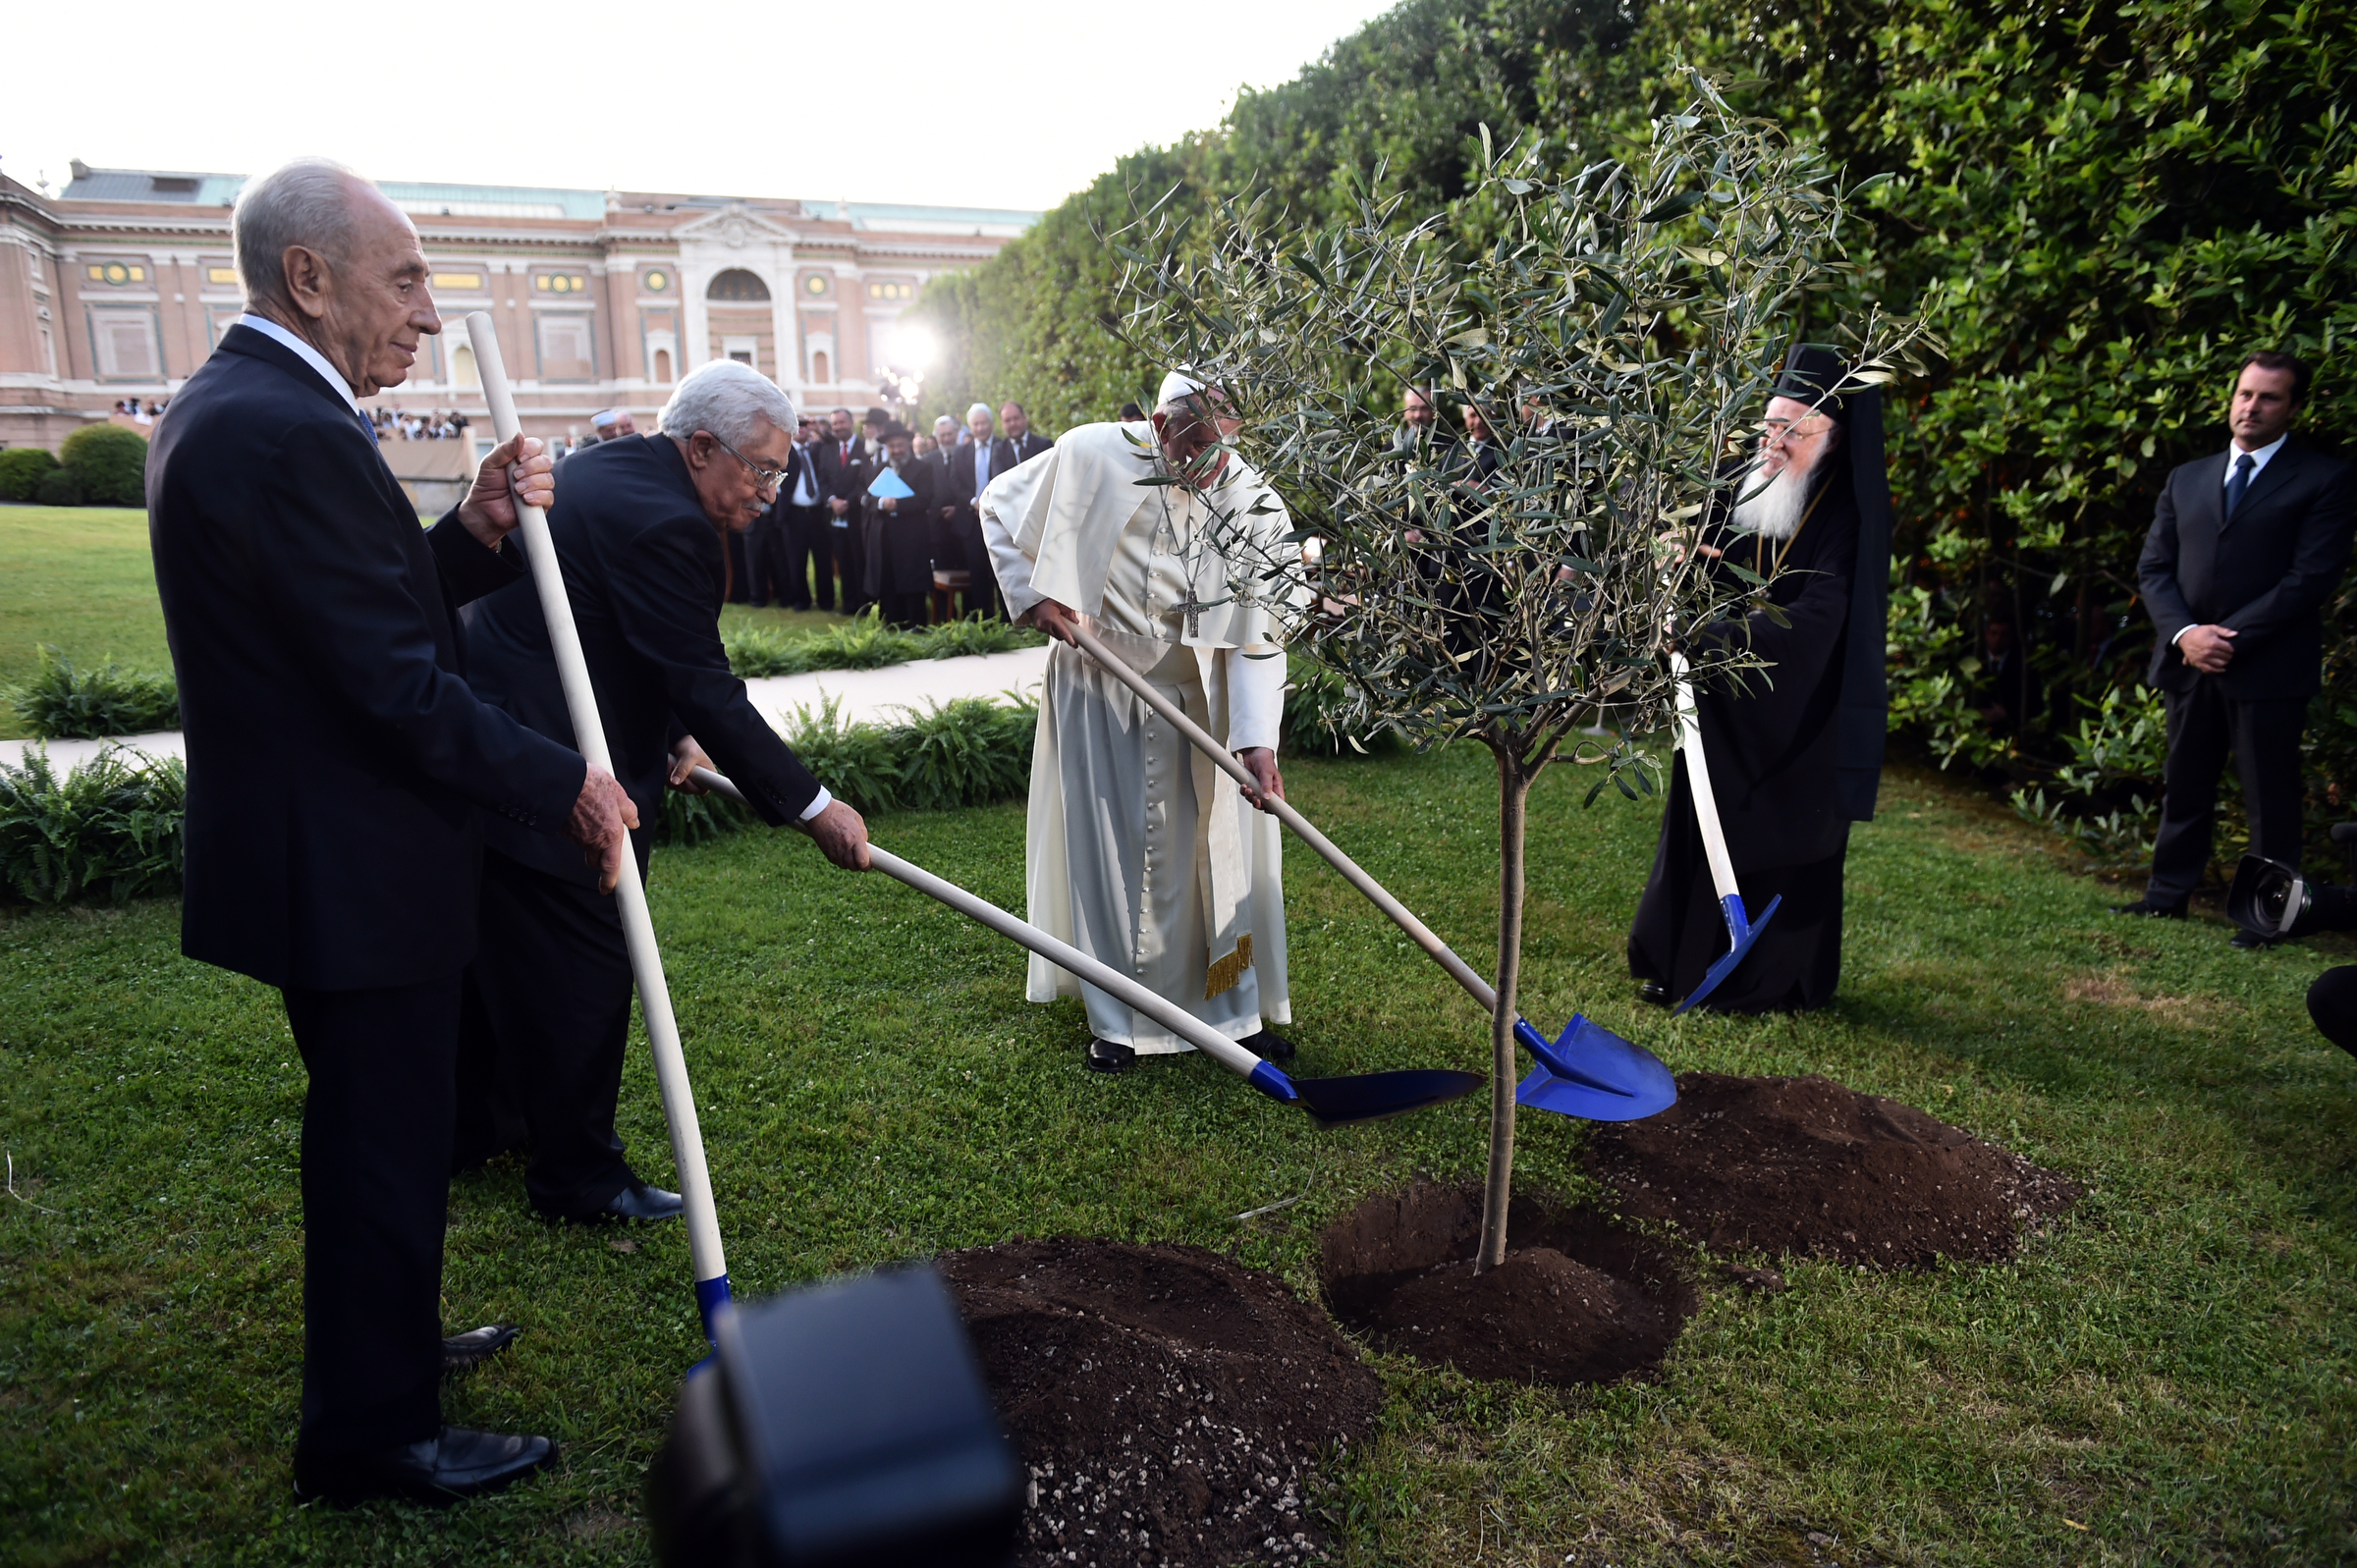 Israeli President Shimon Peres, Palestinian President Mahmoud Abbas, Pope Francis and Ecumenical Patriarch Bartholomew of Constantinople plant an olive tree after an invocation for peace in the Vatican Gardens June 8. (CNS photo/Cristian Gennari, pool) (June 10, 2014) See POPE-INVOCATION June 8, 2014.